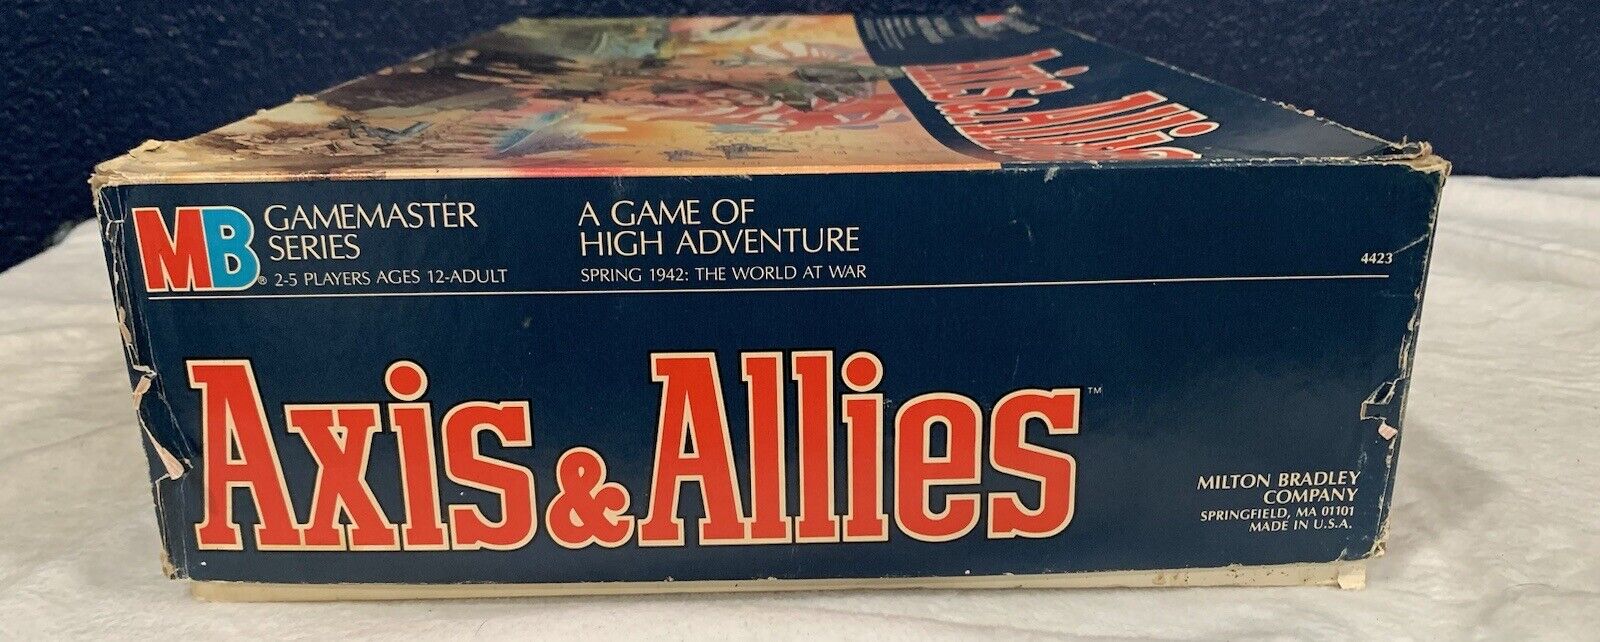 1984 Axis and Allies Game by Milton Bradley Unpunched Complete Open Box Milton Bradley 4423 - фотография #5